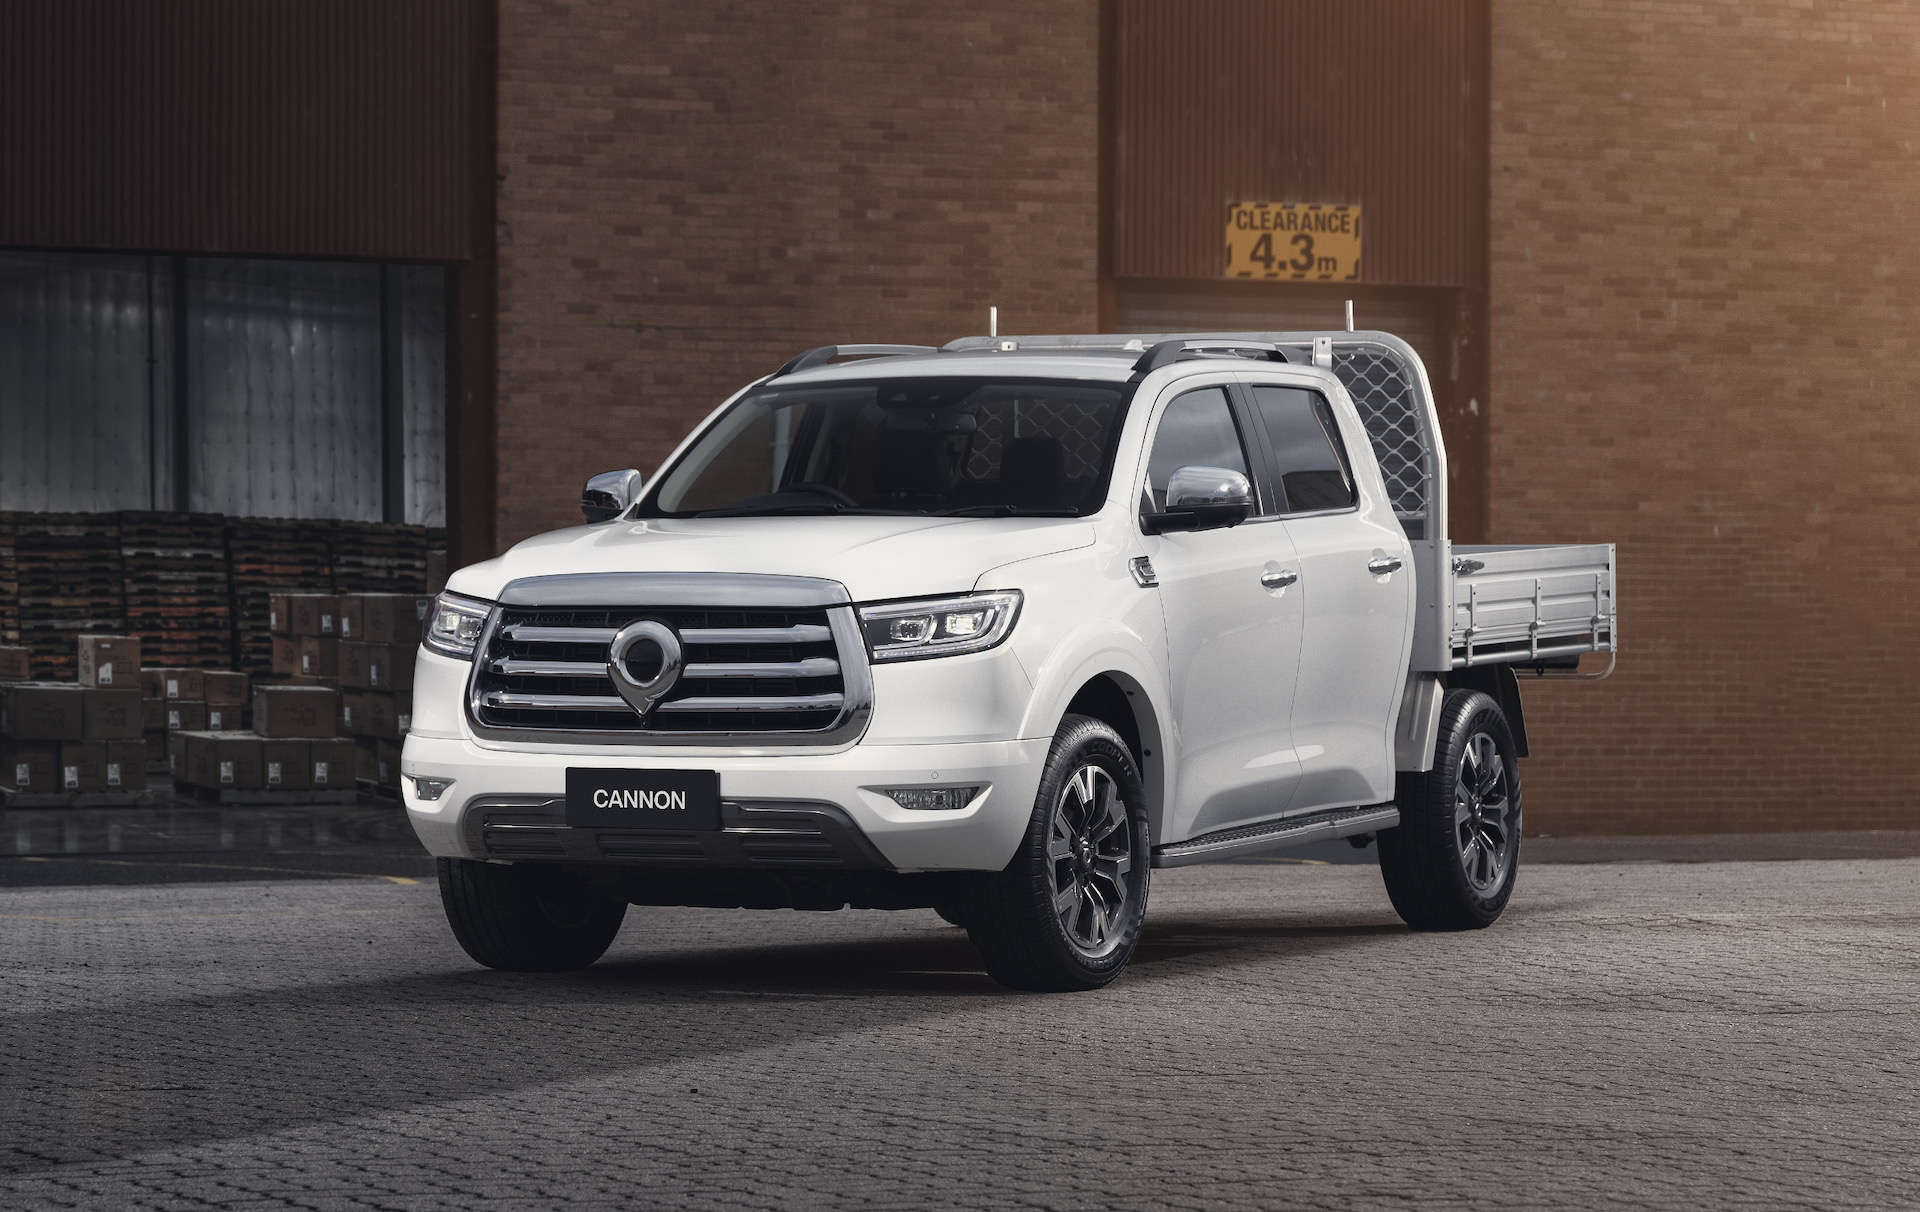 GWM adds cab-chassis to Cannon Ute range, priced from $35,490